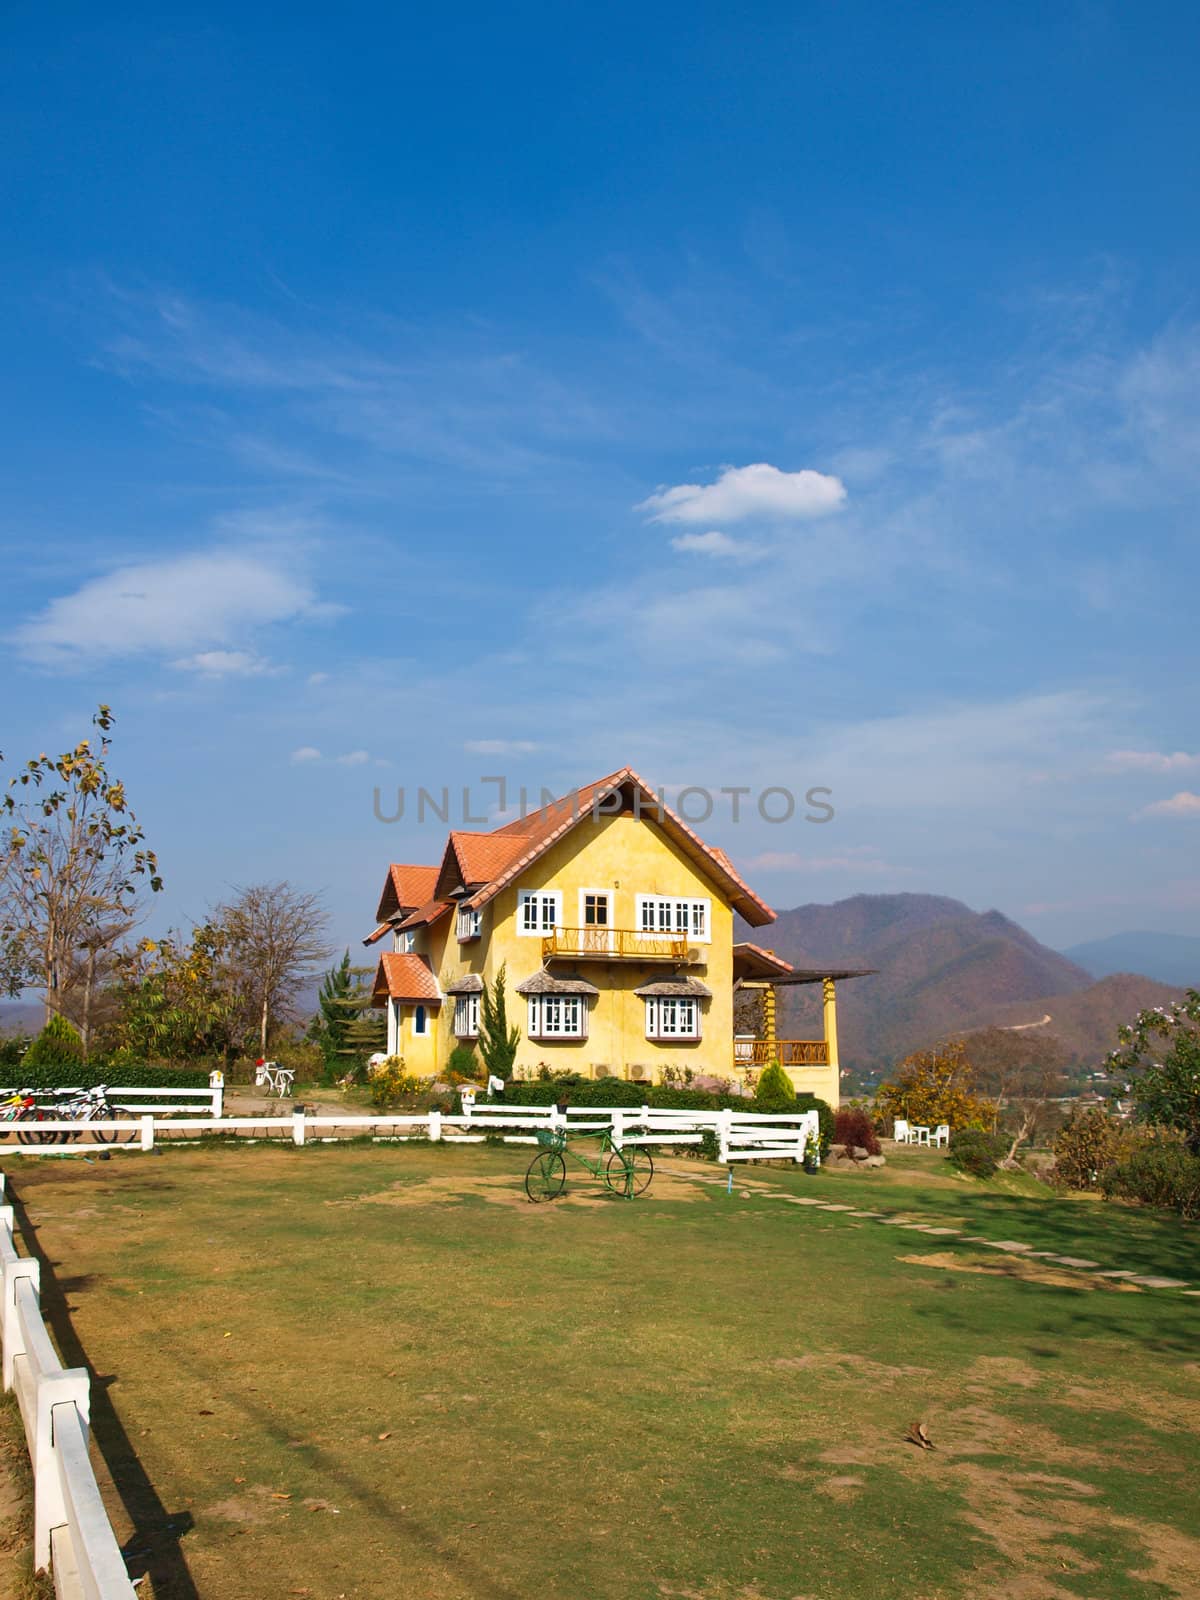 Yellow lovely house and blue sky in pai, mae hong son, thailand by gururugu